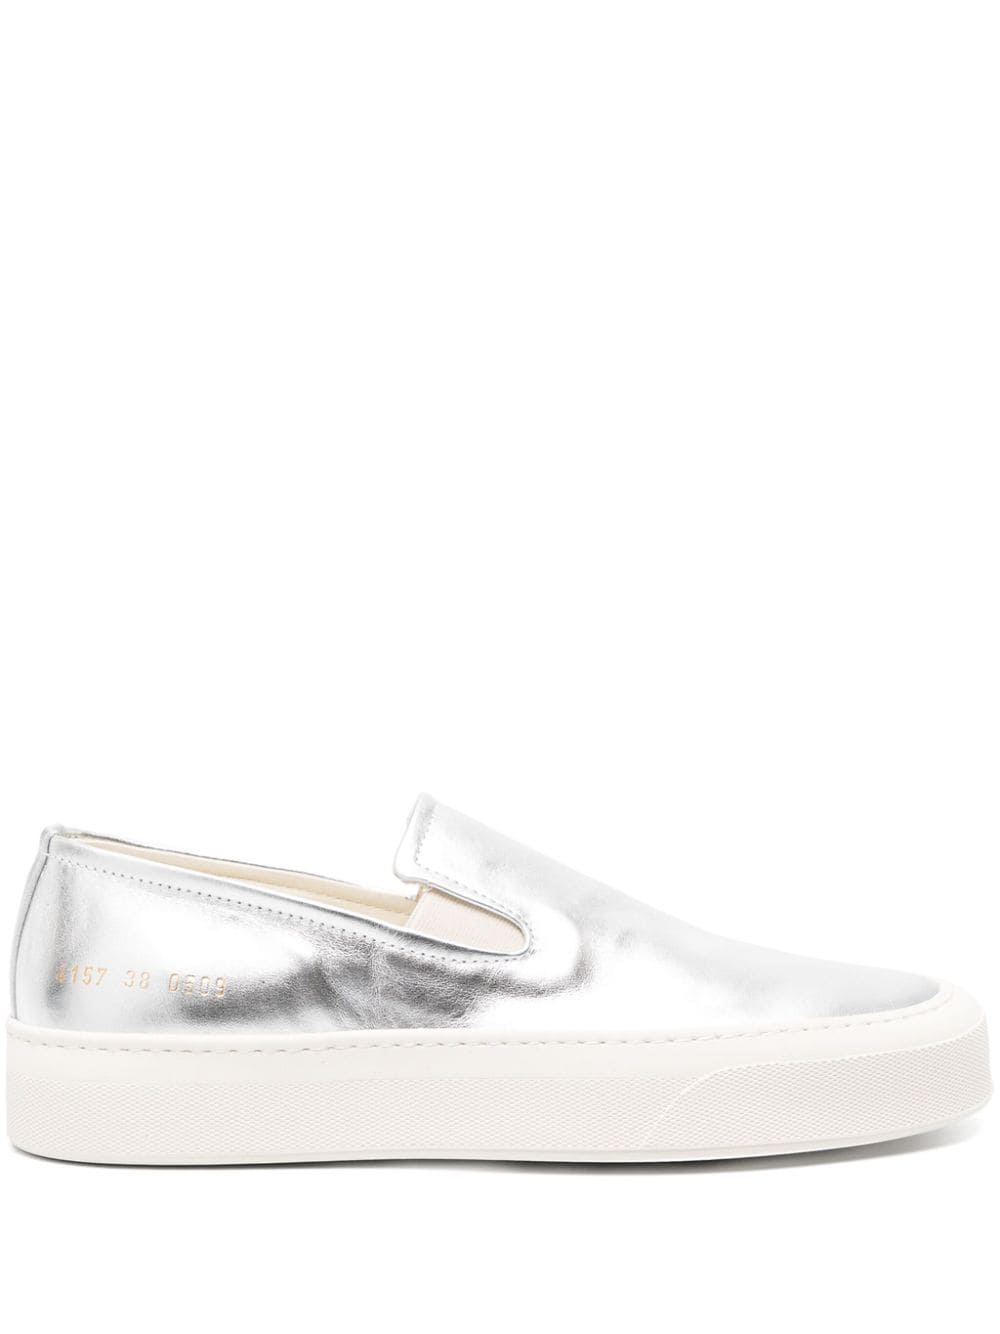 Common Projects slip-on metallic leather sneakers - Silver von Common Projects